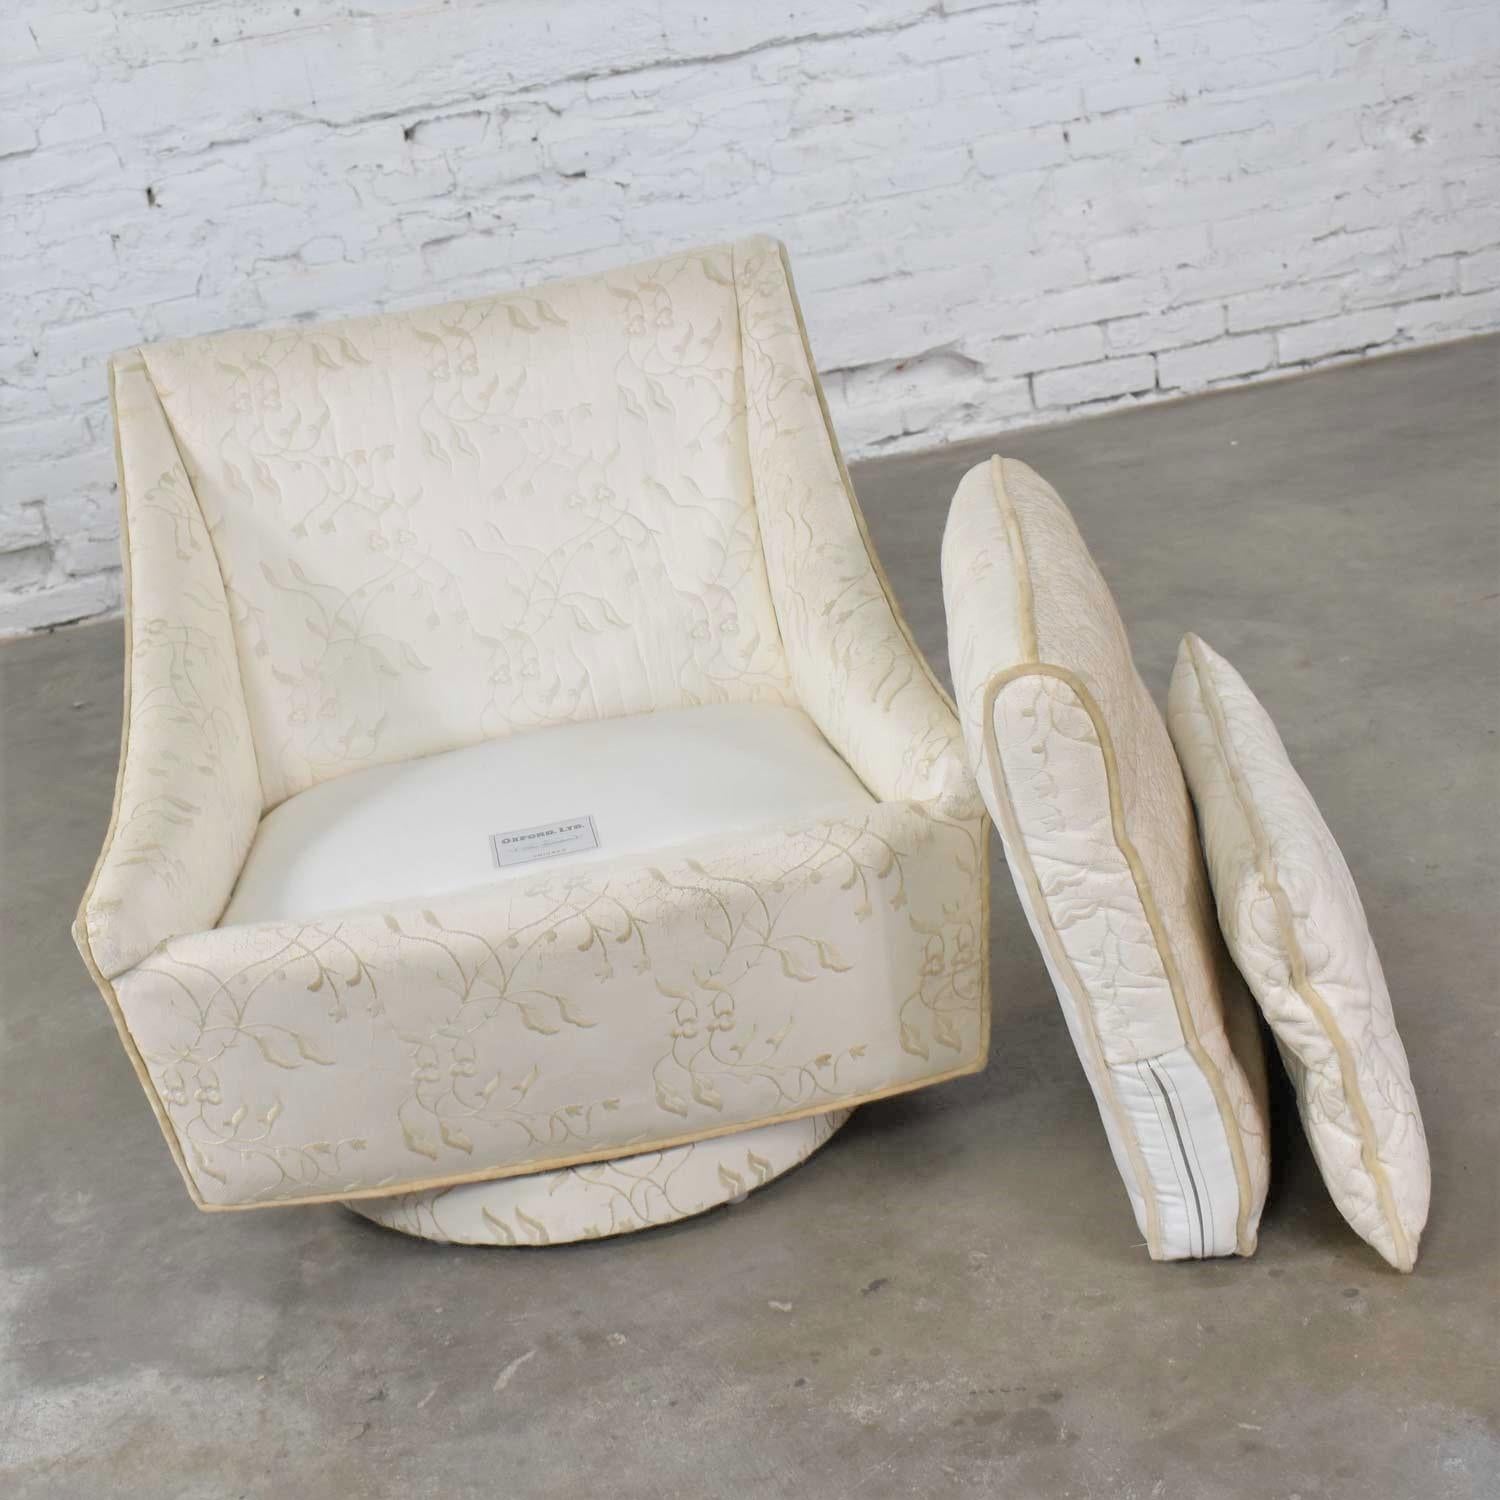 Vintage Art Deco Petite White Swivel Chair Embroidered Leather by Oxford Ltd. For Sale 5